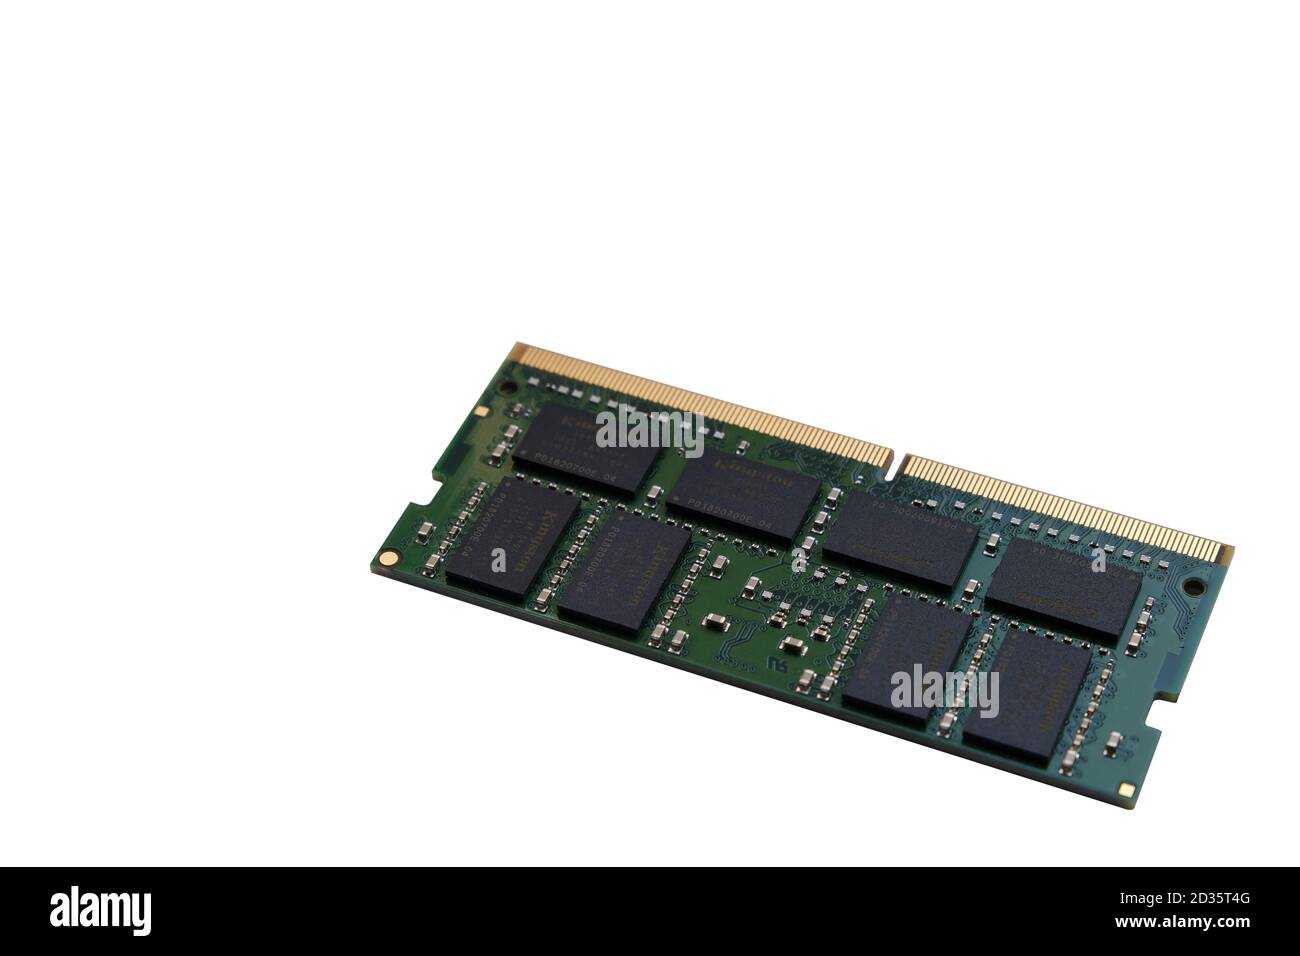 Istanbul, Turkey - October 6, 2020 : Rear view of a Kingston Technology 16gb 2666 mhz Ddr 4 Ram for notebooks isolated on white background. Stock Photo